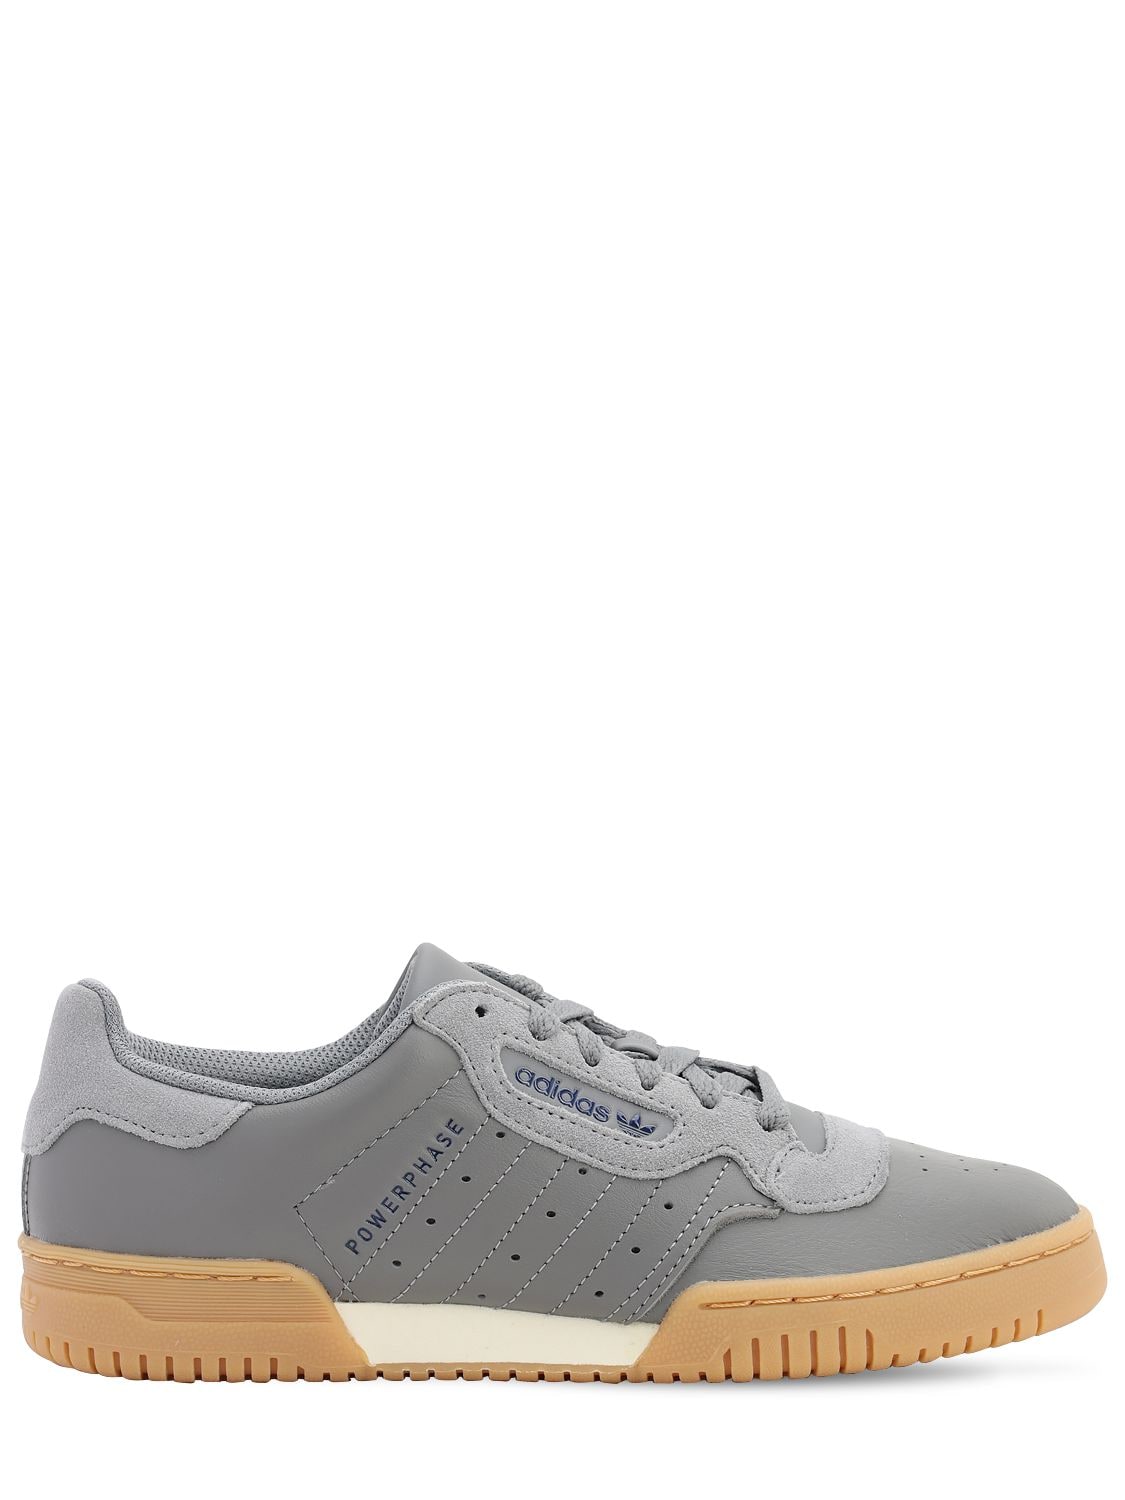 ADIDAS ORIGINALS POWERPHASE LEATHER SNEAKERS,70I3EG017-R1JFWQ2